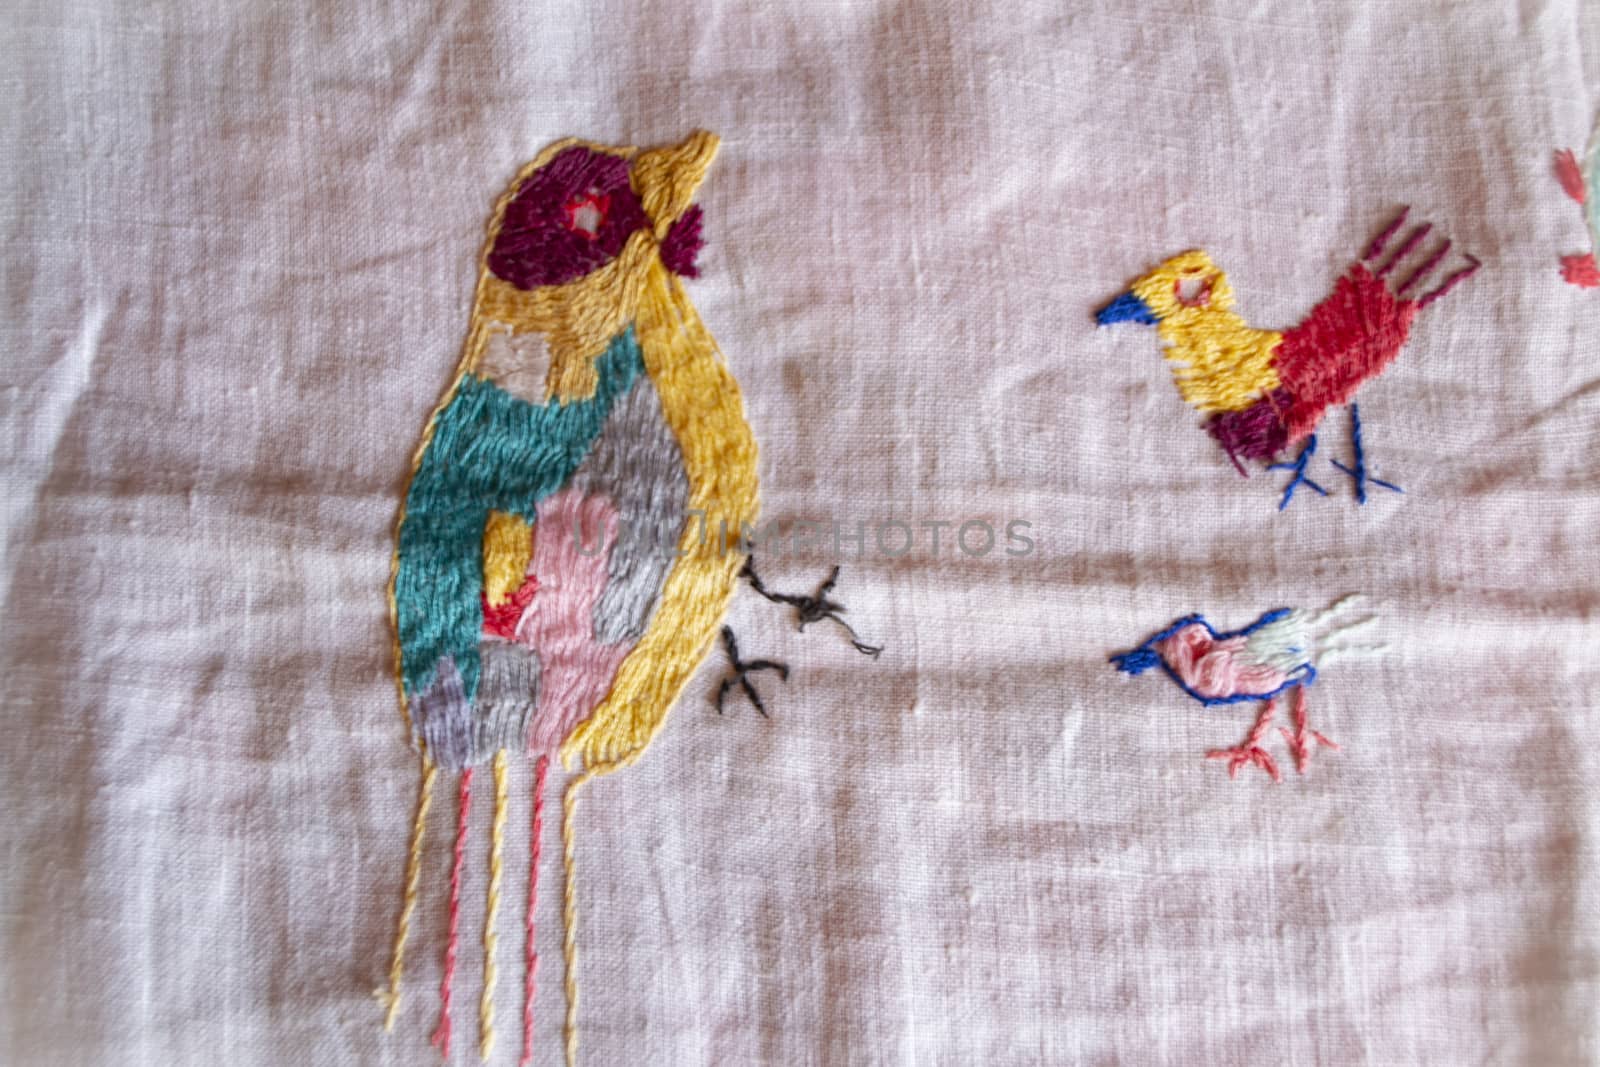 farm hand made embroidered smooth decoration on white fabric , vintage folk embroidery in Belarus, second half of 19 century